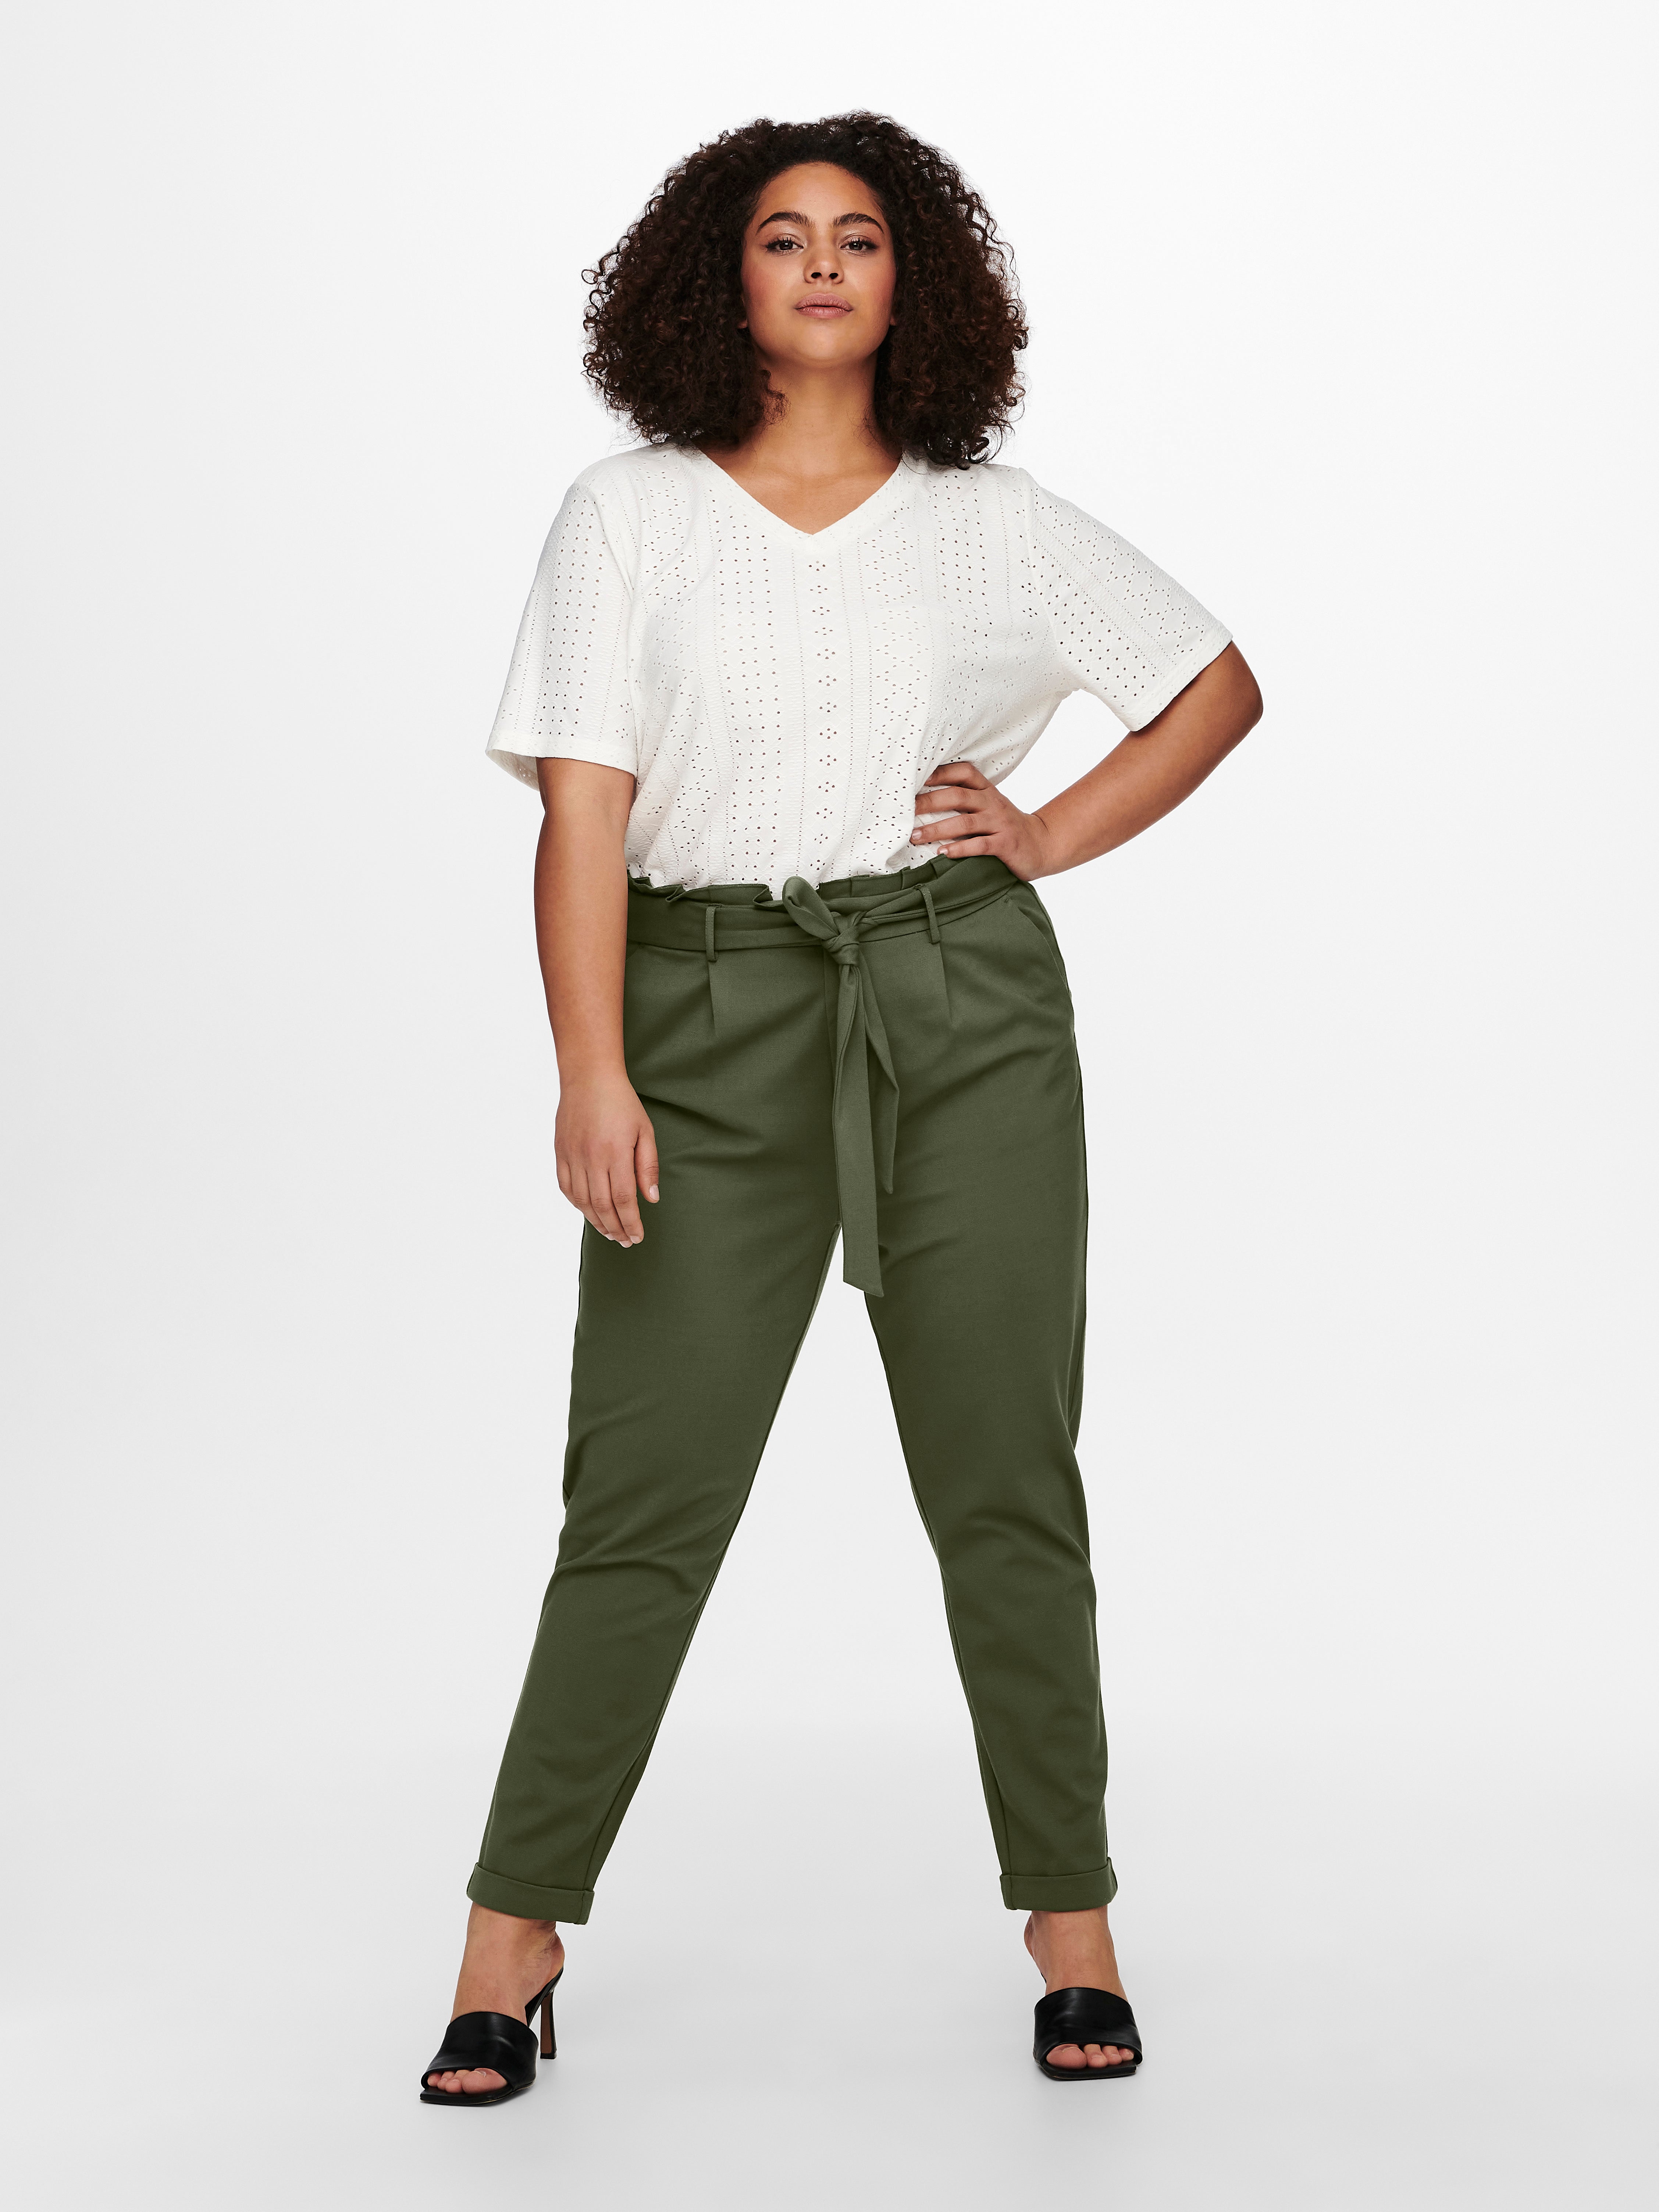 Belted Paperbag Waist Pants (Plus Size - Camel) – In Pursuit Mobile  Boutique || Apparel, Accessories & Gifts Saint John, New Brunswick